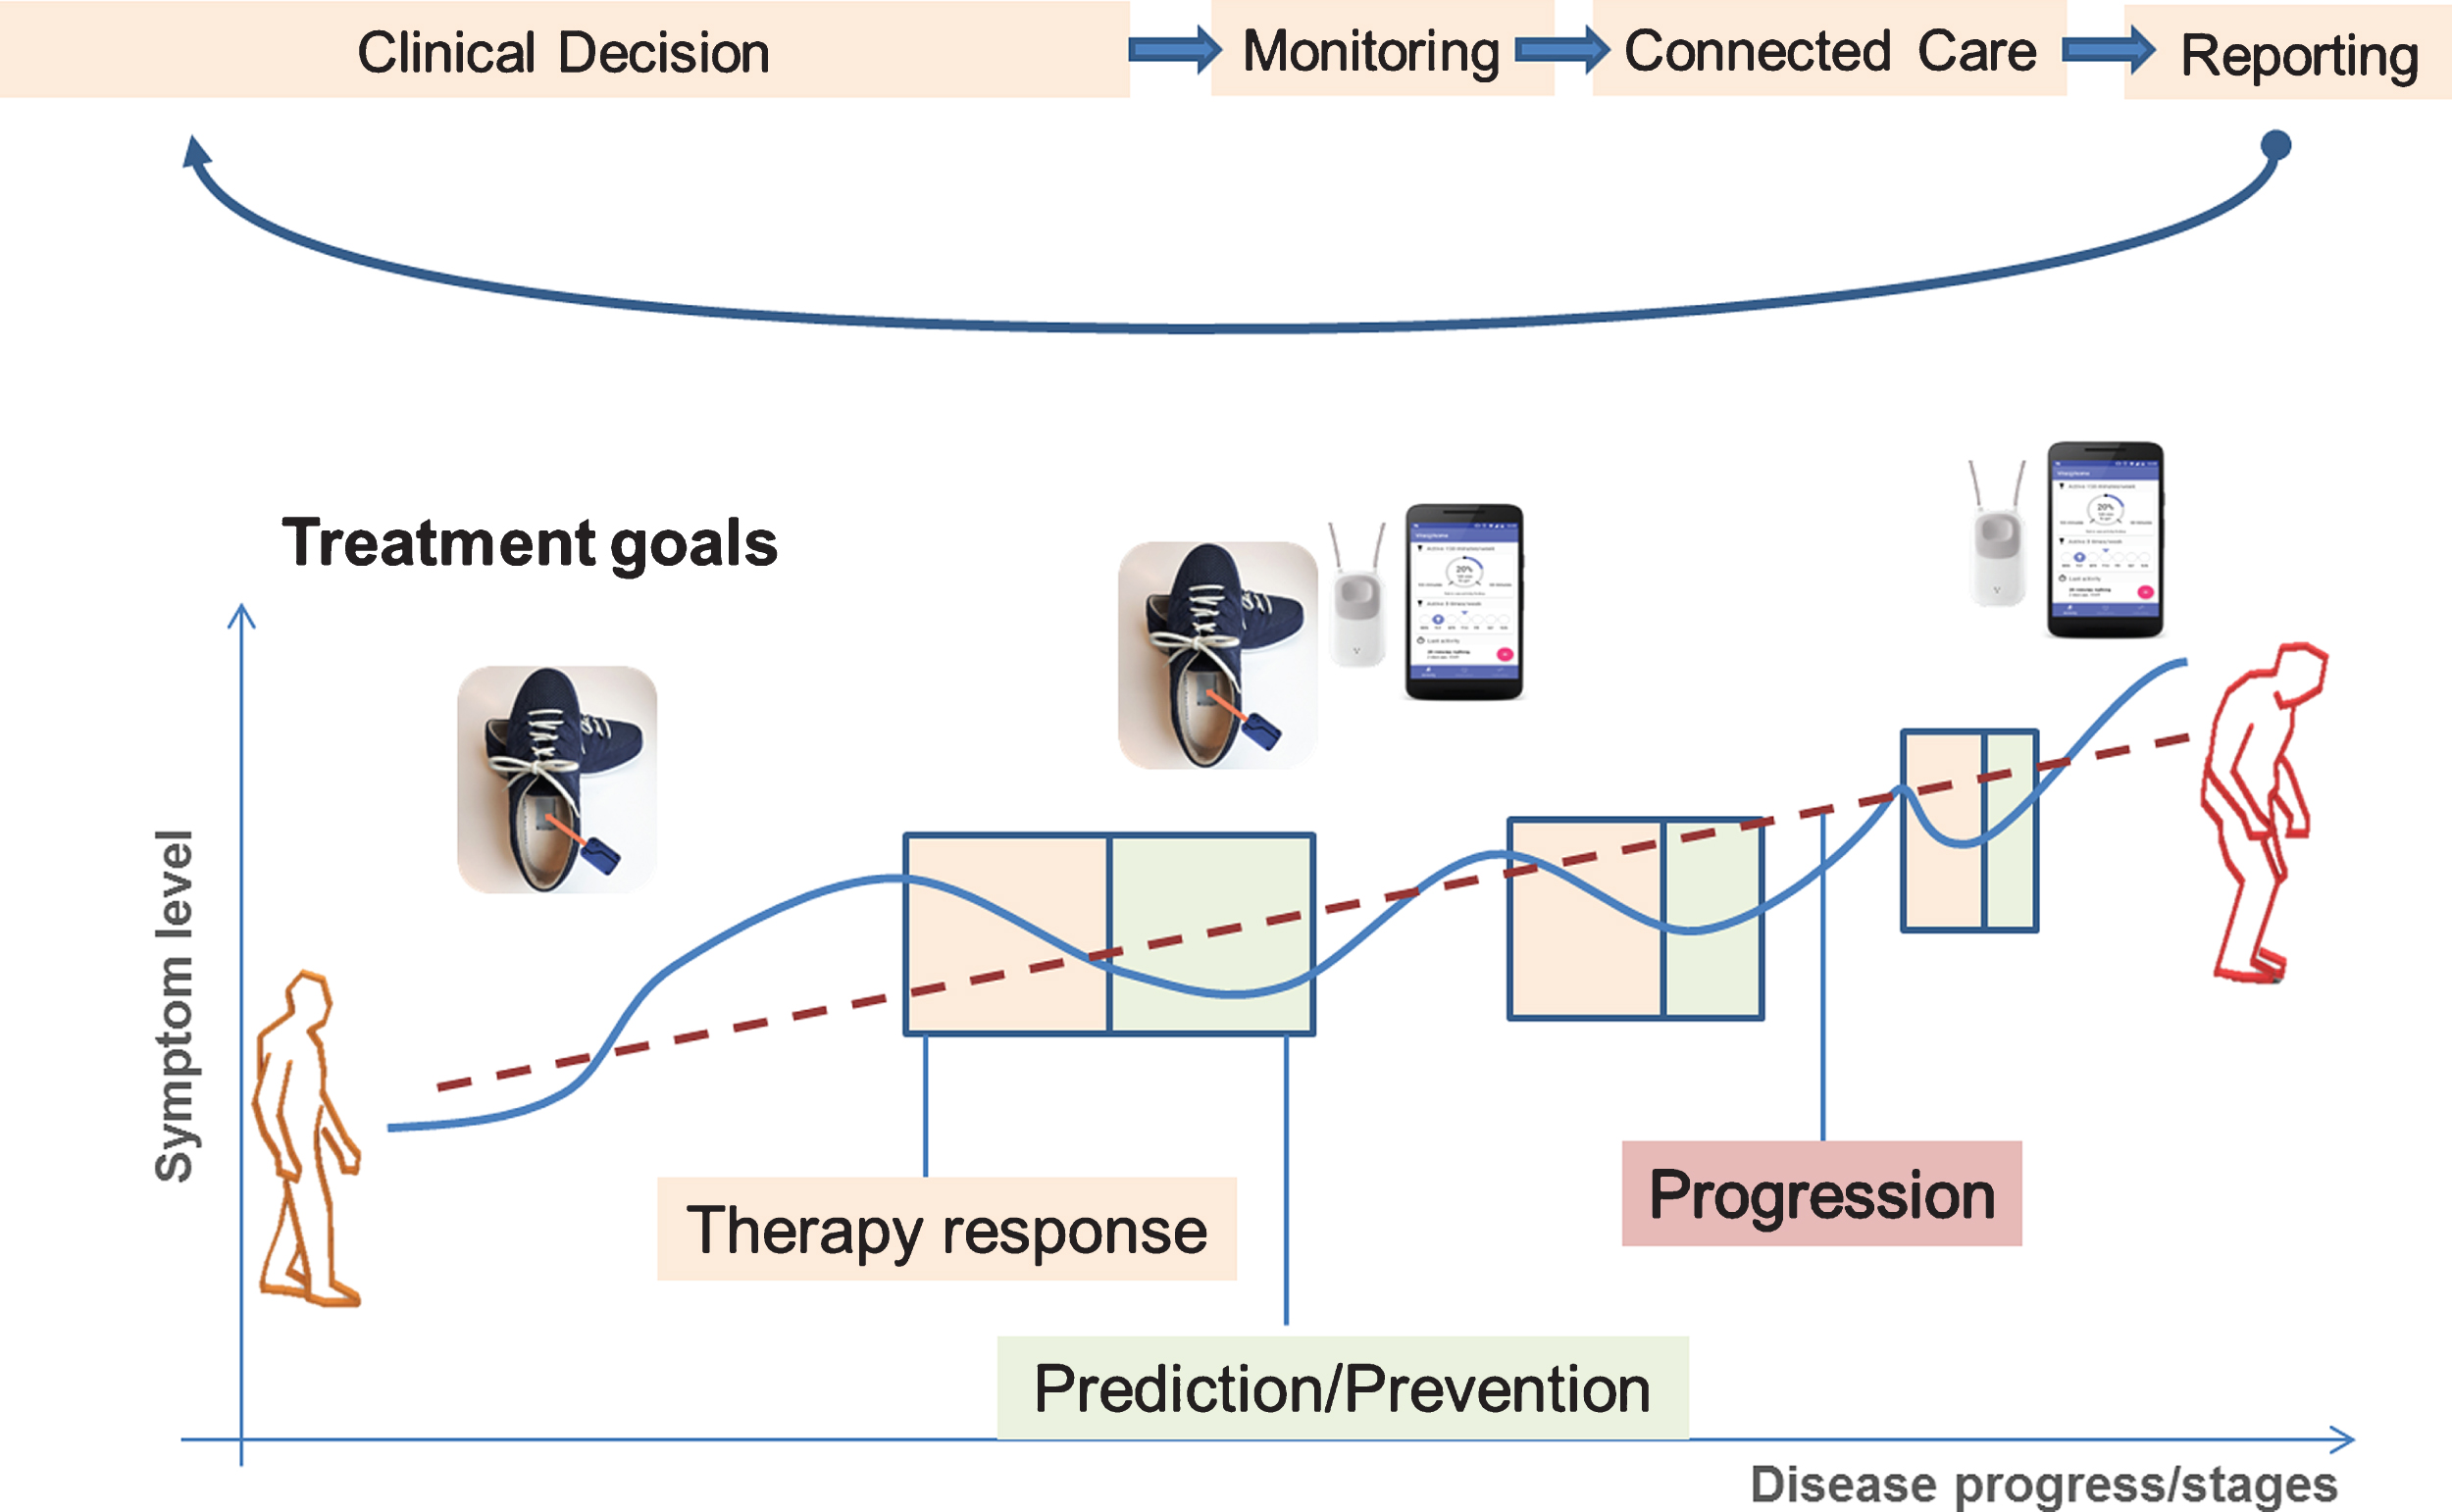 Digital Health Pathway for Gait and Falls in PD. The patient here is monitored using a combination of wearable sensors equipped with gyroscopes and accelerometers that are incorporated into the subject’s own shoes, or into a falls detector (worn as a necklace around the neck) and a smartphone. Two typical real-life care scenarios are illustrated here. Therapy response: the current state of the individual patient indicates a worsening at the symptom levels that necessitates an adaptation of the therapy (e.g., increase or reduce pharmacological treatment, initiate or intensify physiotherapy, etc.). Prediction/prevention: the symptom level is in an optimal state, and there is no need to adjust the therapy, but now the goal is to predict new worsening or development of foreseeable symptoms along natural disease progression (e.g., development of postural instability, increased risk of falling, etc.). Additionally, the overall disease trajectory expressing the theoretical progression rate of the individual patient also taking into account intercurrent events (infections, co-morbidities, operations, etc.) can be deducted from longitudinal and individualized target parameter assessment over the disease course.